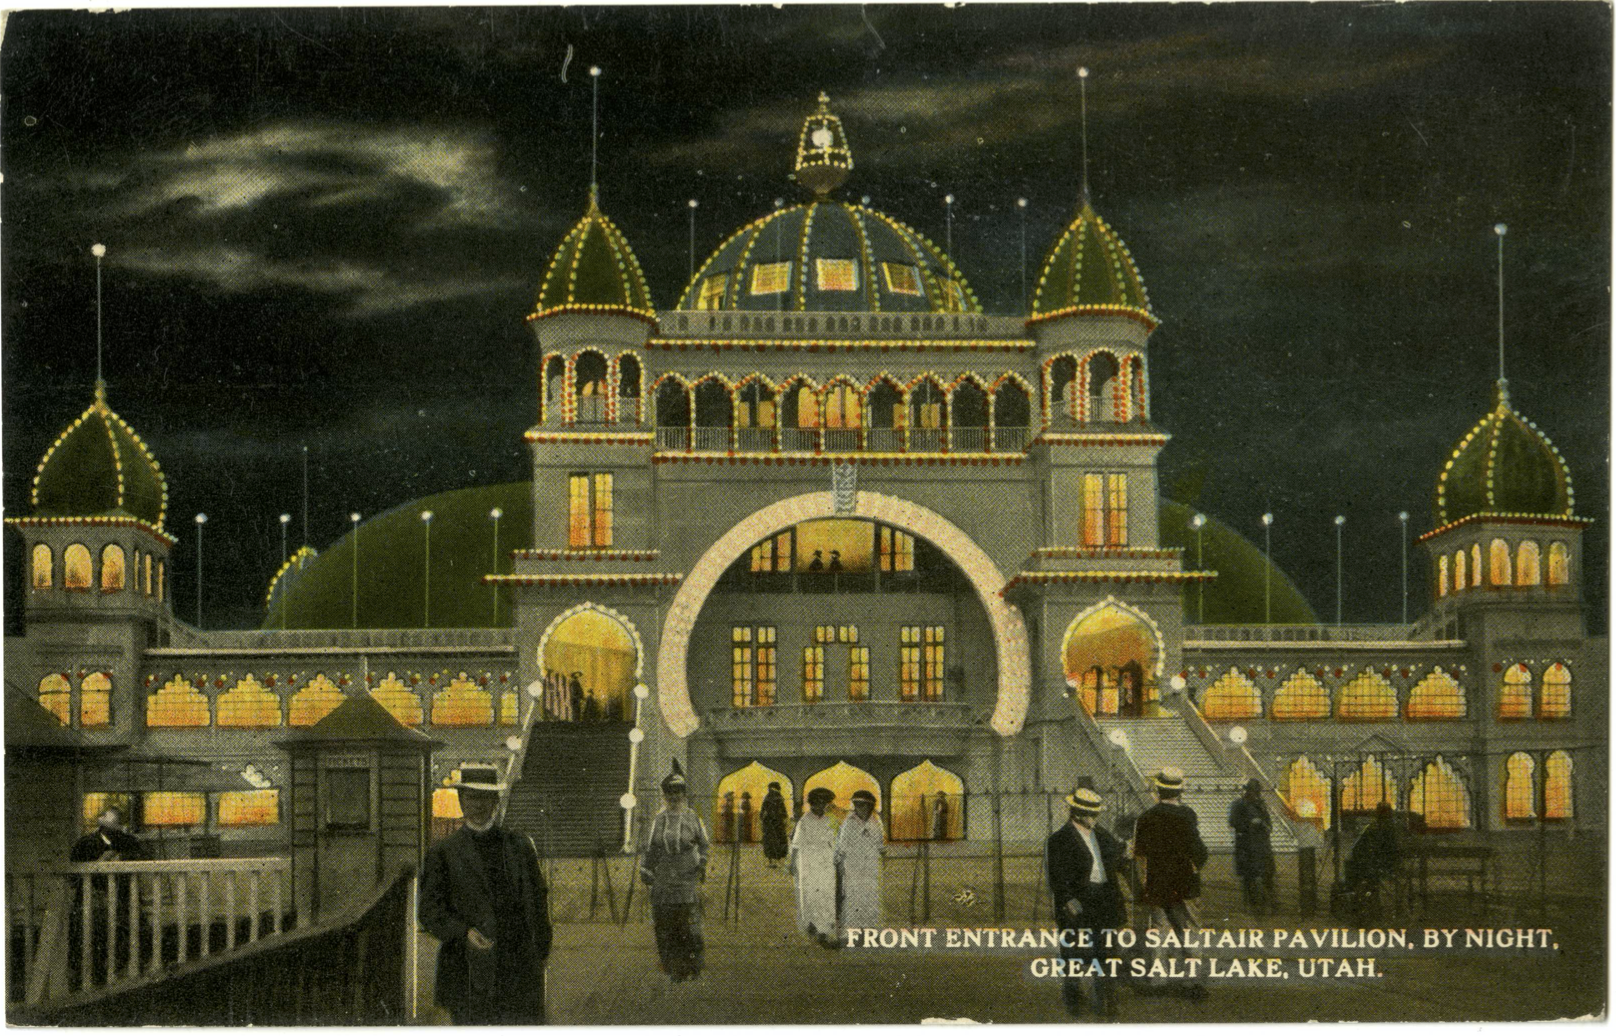 A souvenir postcard by Souvenir Novelty Company of a night scene of the lit up front entrance to the Saltair Pavilion on the Great Salt Lake.